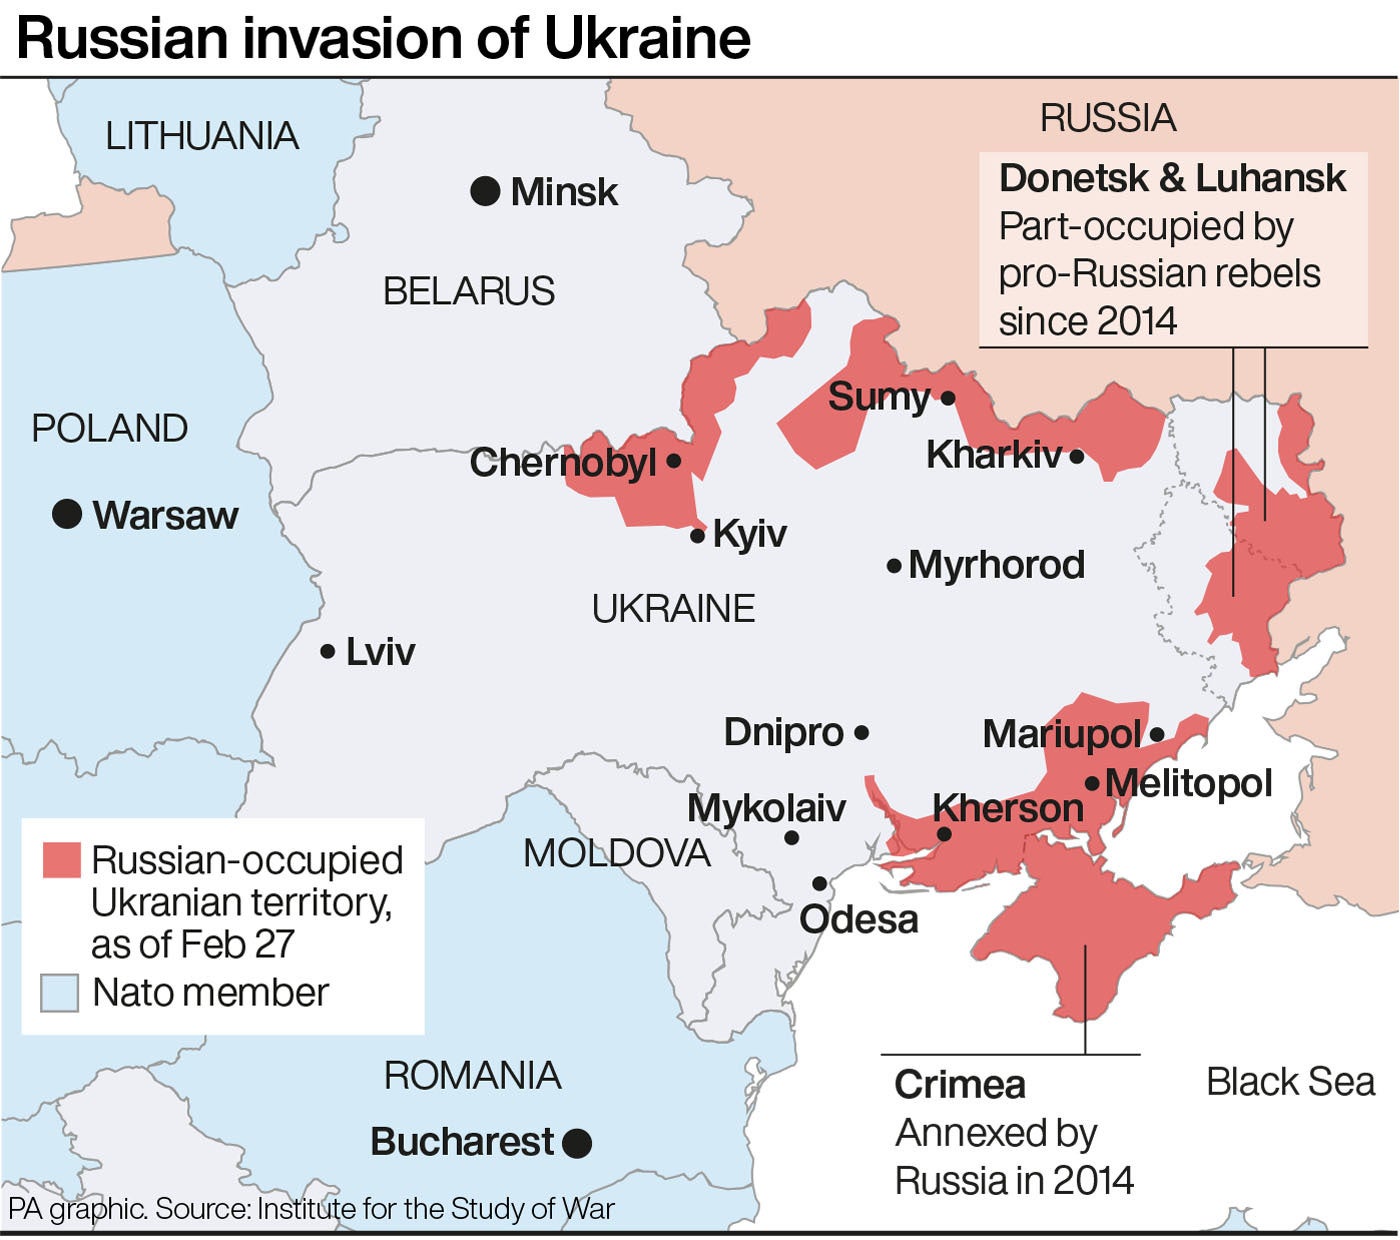 Map shows the extent of Russia’s invasion of Ukraine